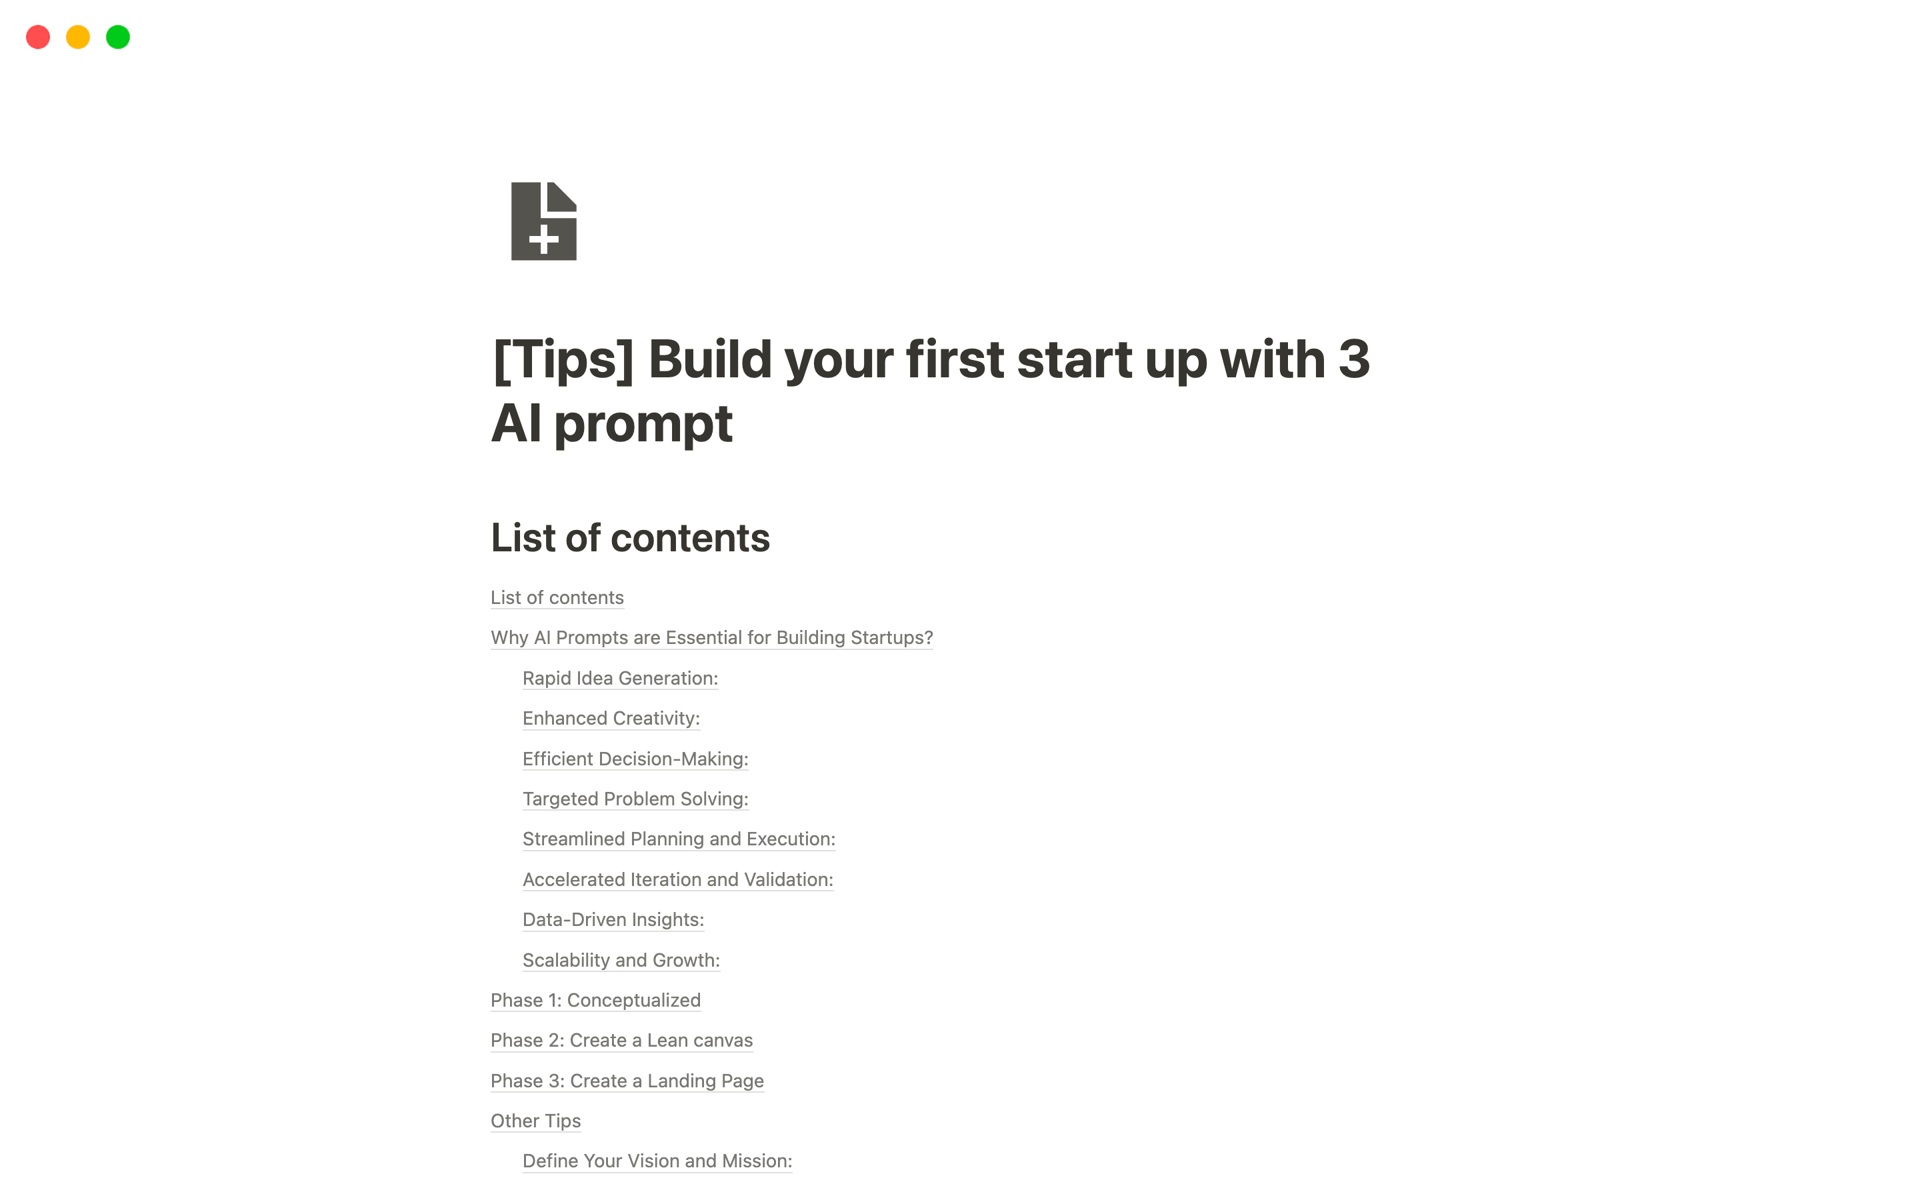 Build your first start up with 3 AI prompts님의 템플릿 미리보기